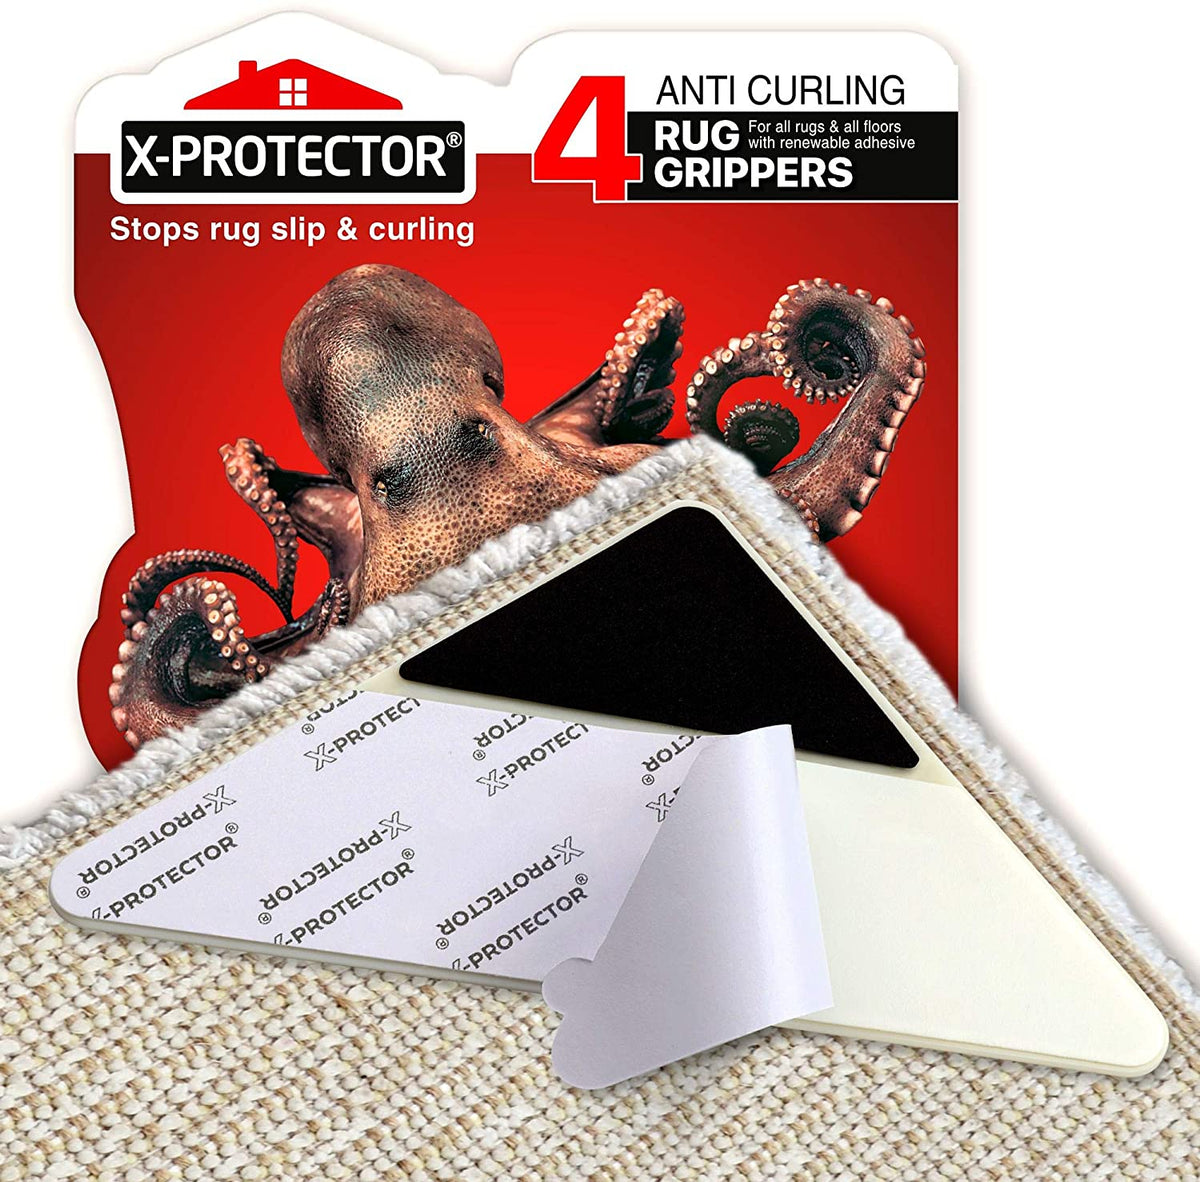 Rug Gripper,4 PCS Rug Grippers for Area Rugs,Non Slip Rug Grippers for  Hardwood Floors,Anti Slip Carpet Pads for Tile/Wood Floor,Area Stickers Rugs  Grips Stoppers to Prevent Curling. 